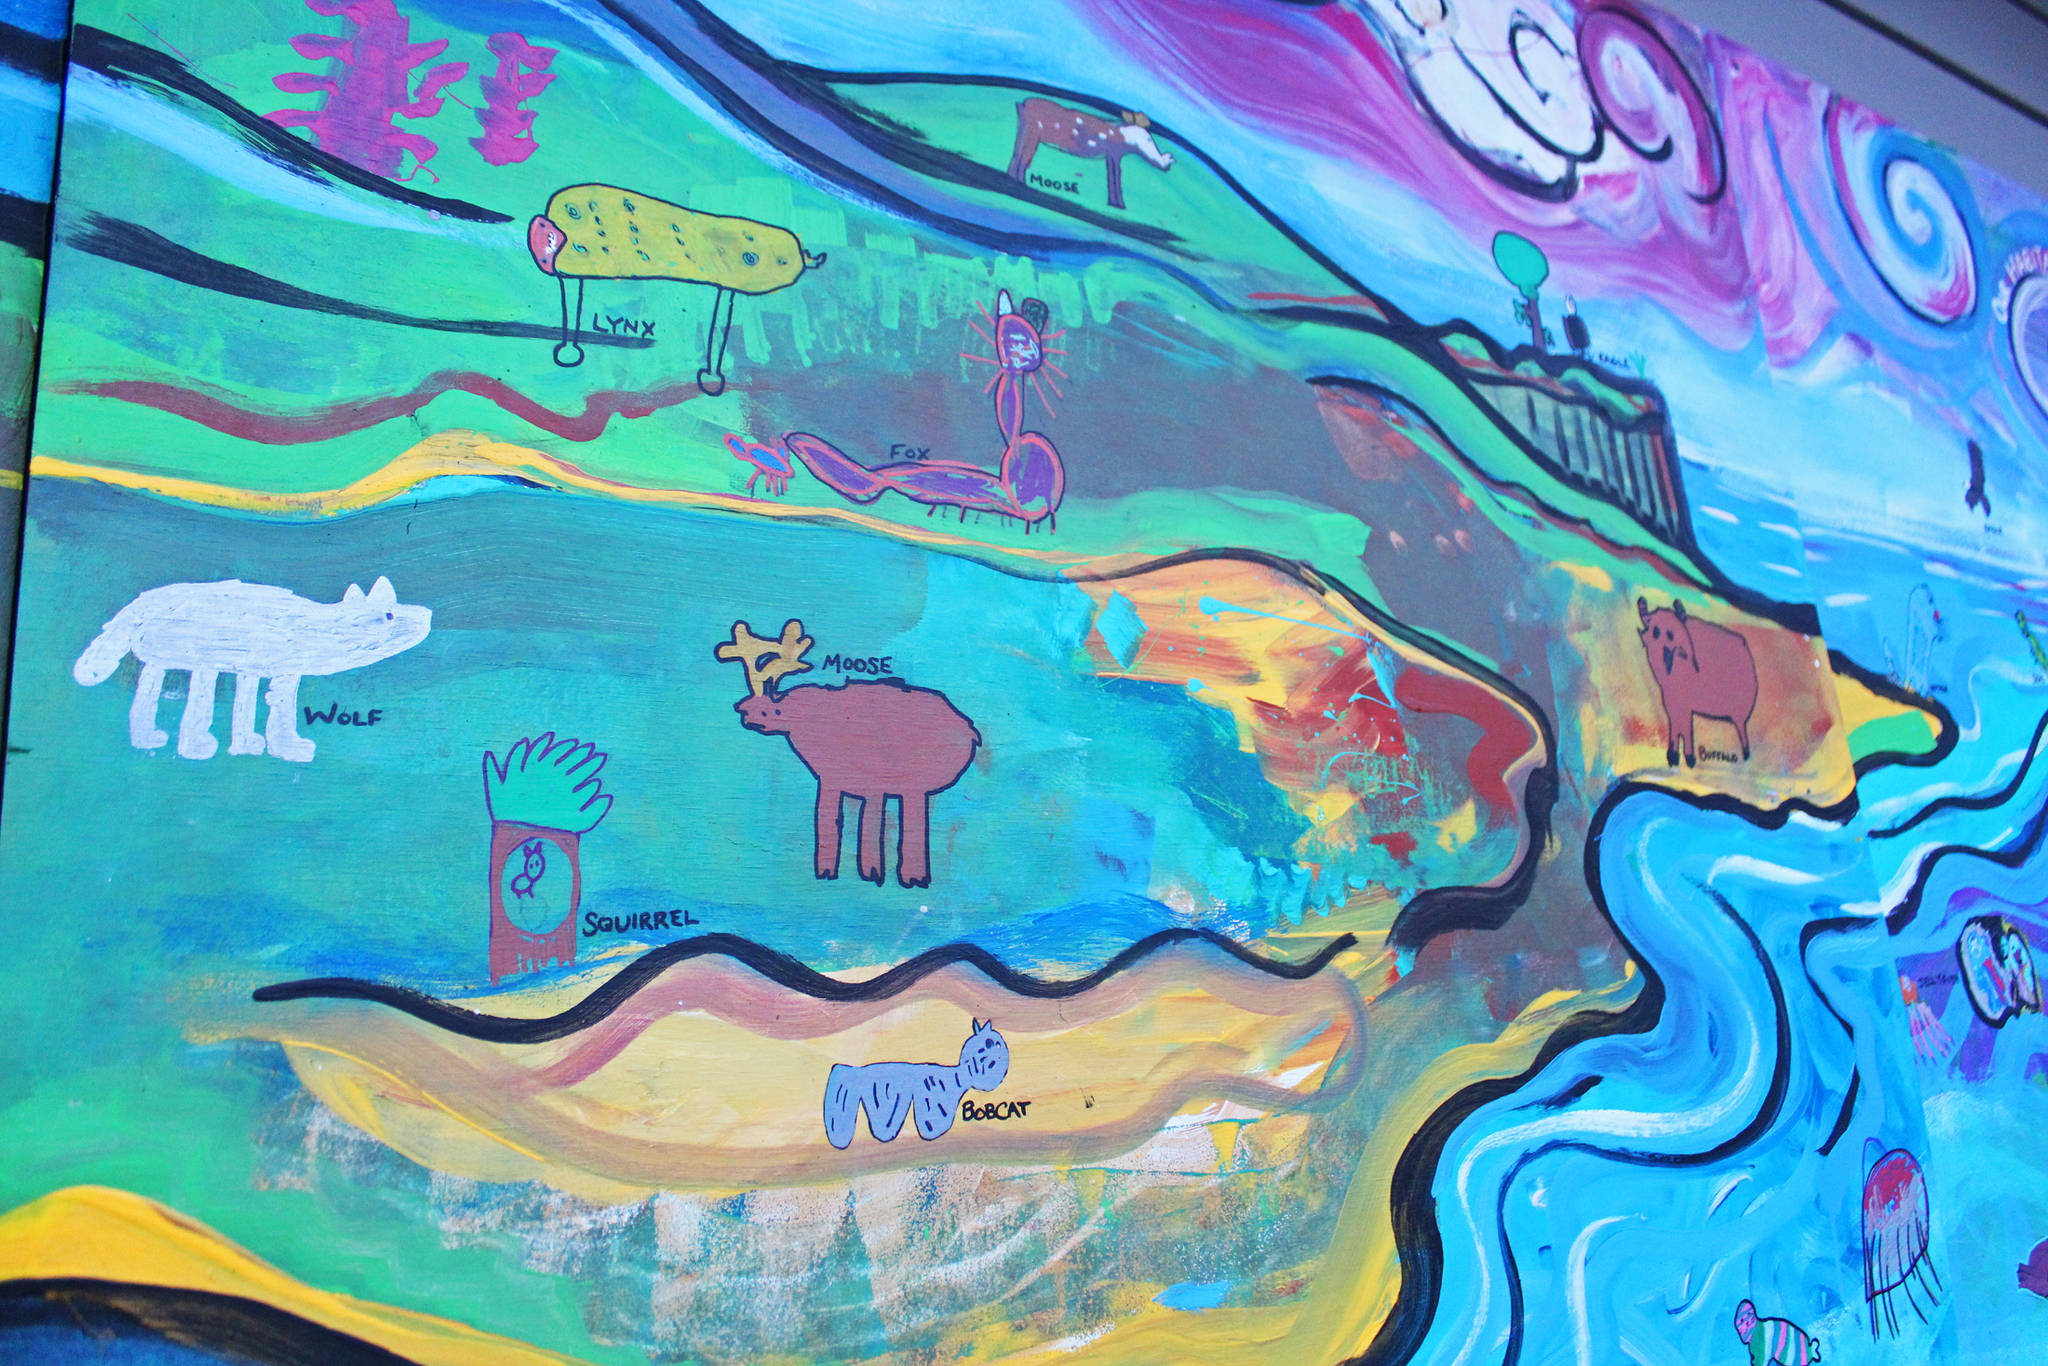 A mural of an Alaska habitat and animals painted by Fireweed Academy students is displayed on the outside of the school on East End Road on Friday, Nov. 22, 2019 in Homer, Alaska. Each quarter, students are creating a new mural to go along with a new education theme. (Photo by Megan Pacer/Homer News)